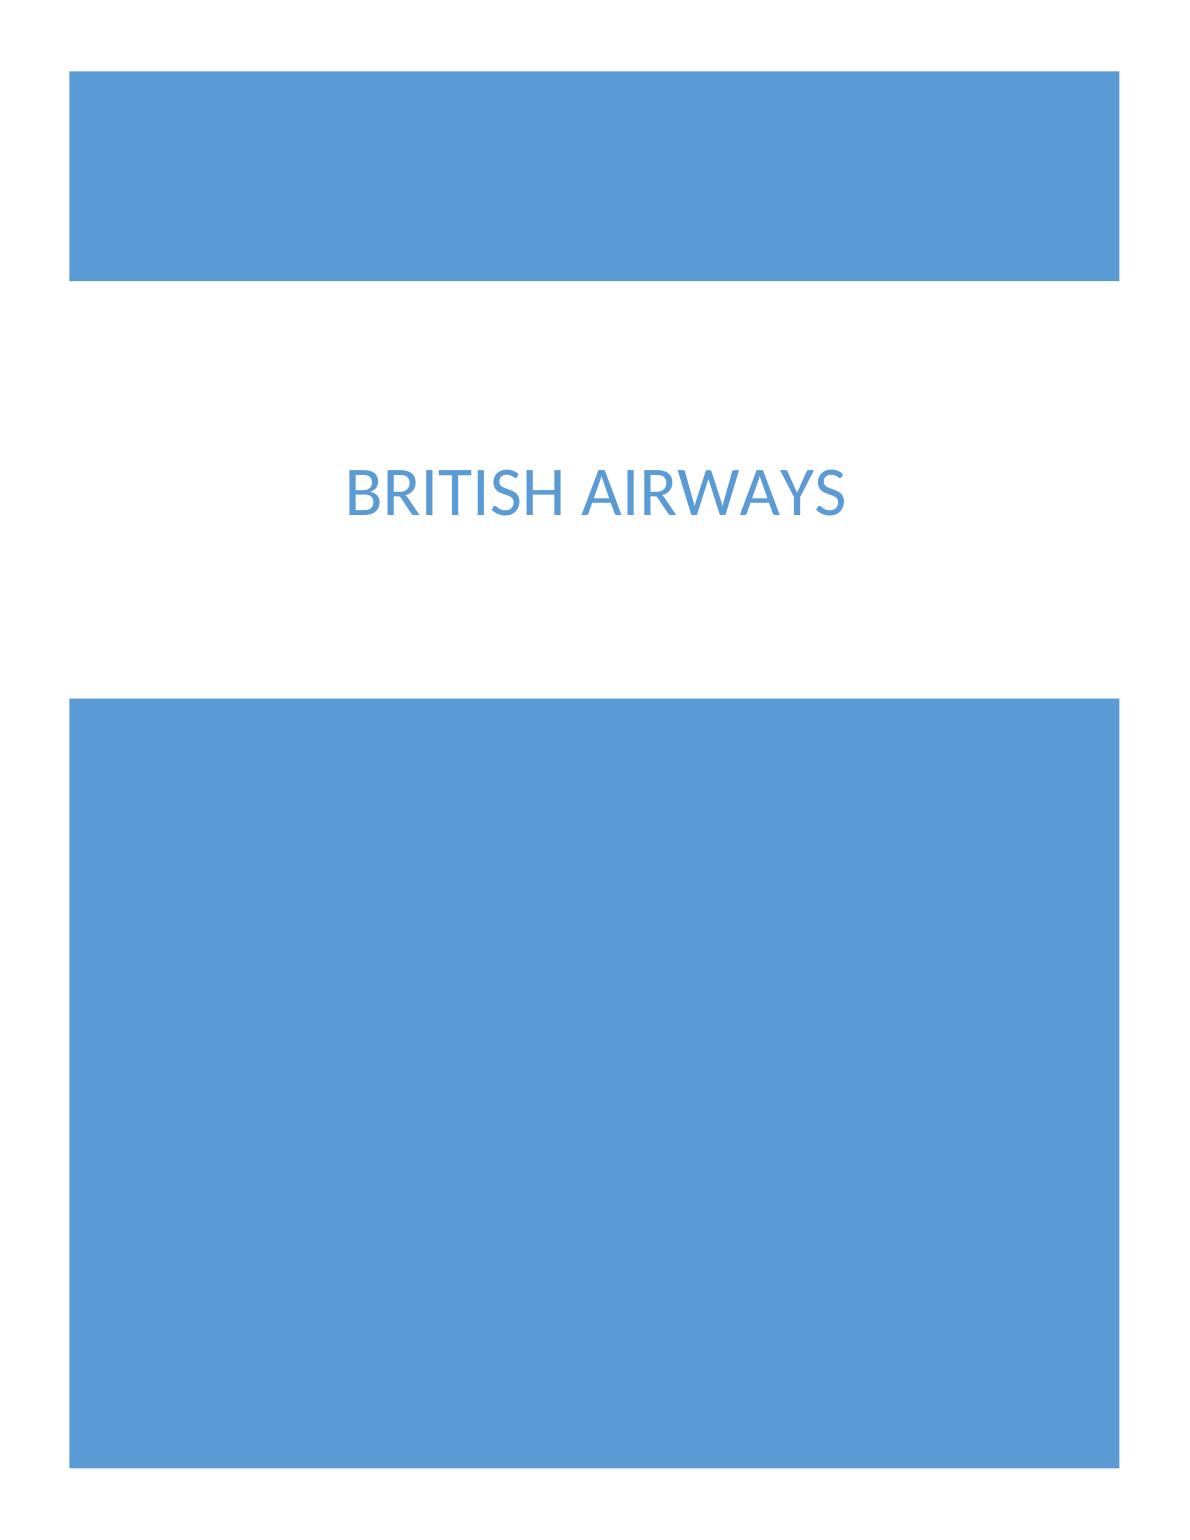 Marketing Strategy, International Marketing Problems and Challenges, Ethical Issues and Solutions for British Airways_1